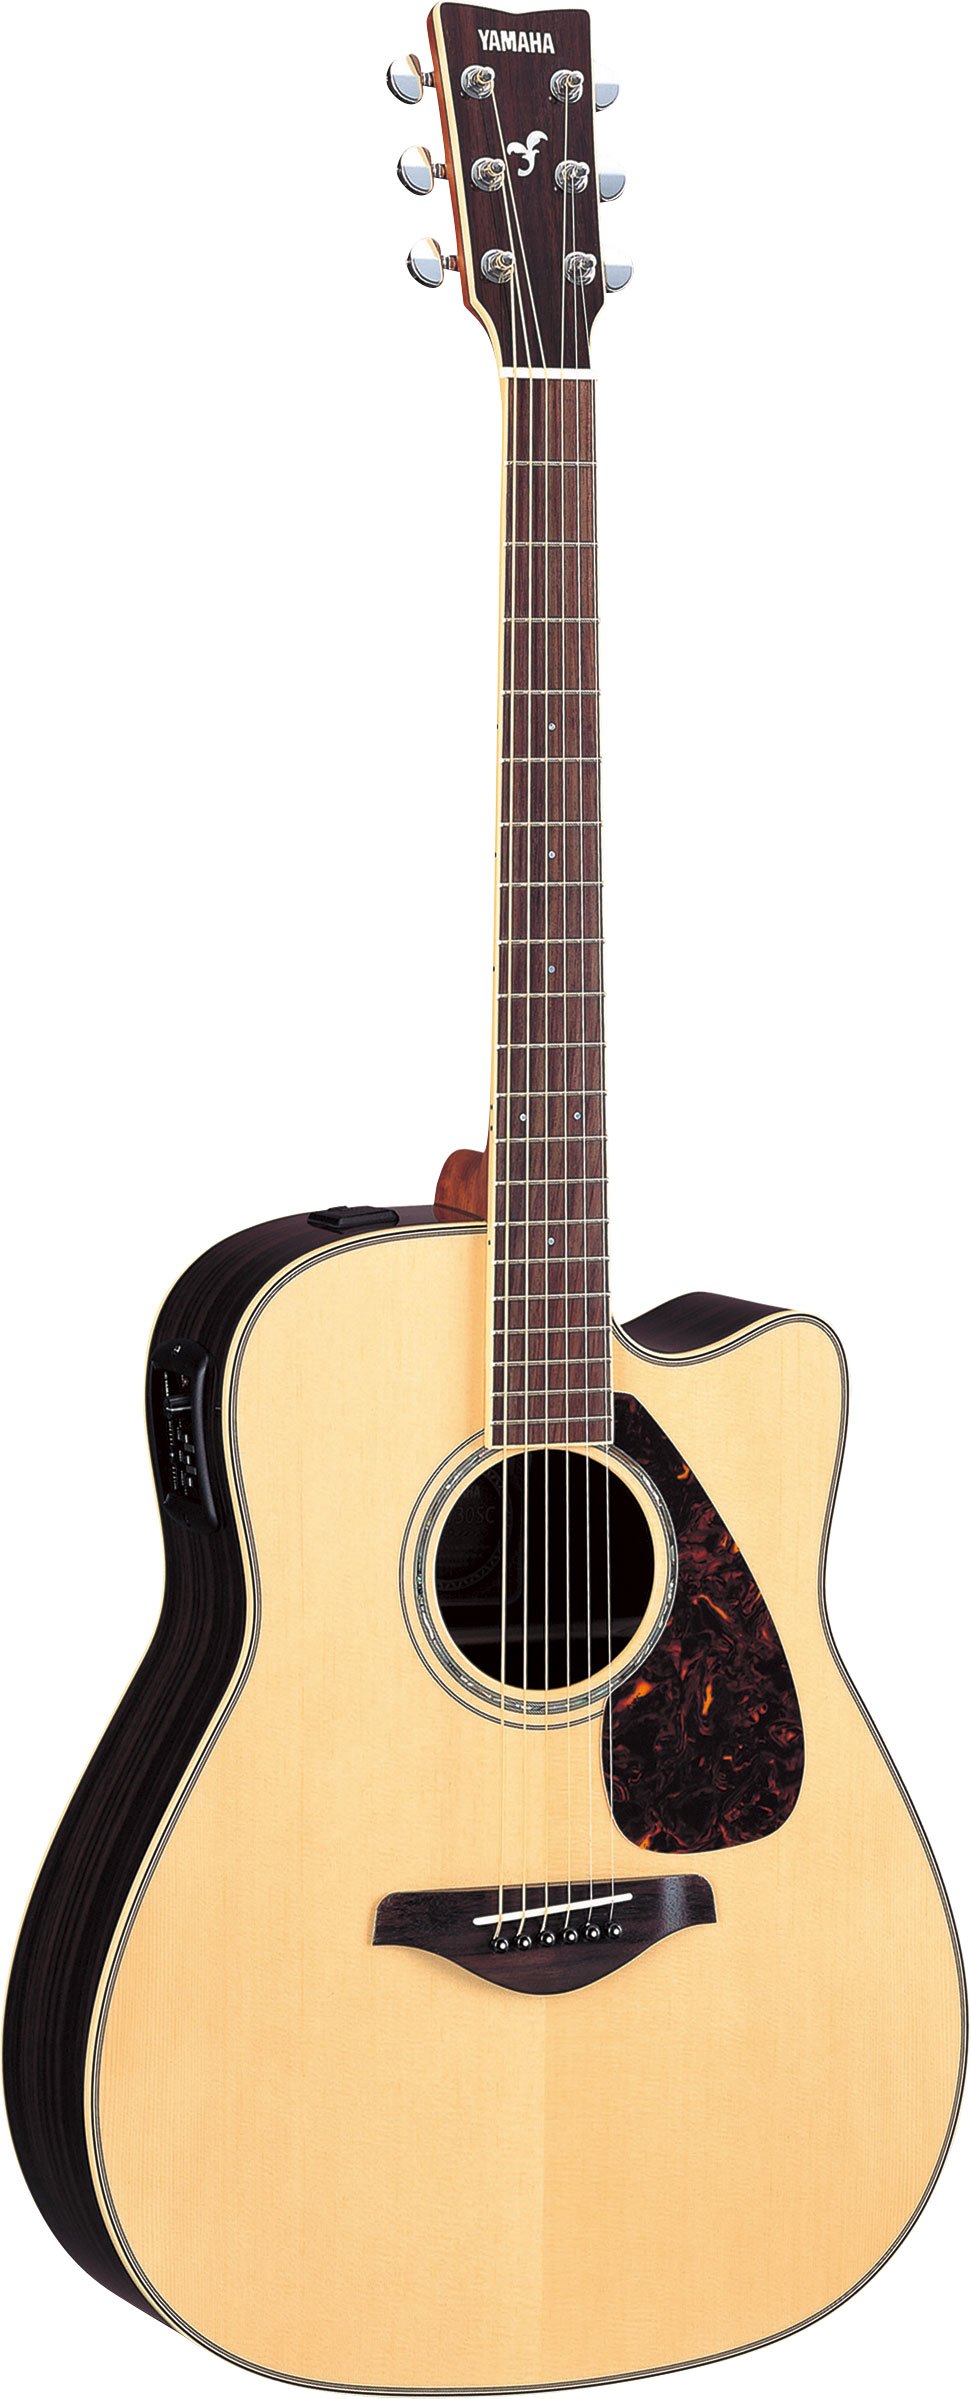 FG / FGX / FSX / FJX Series - Overview - Acoustic Guitars 